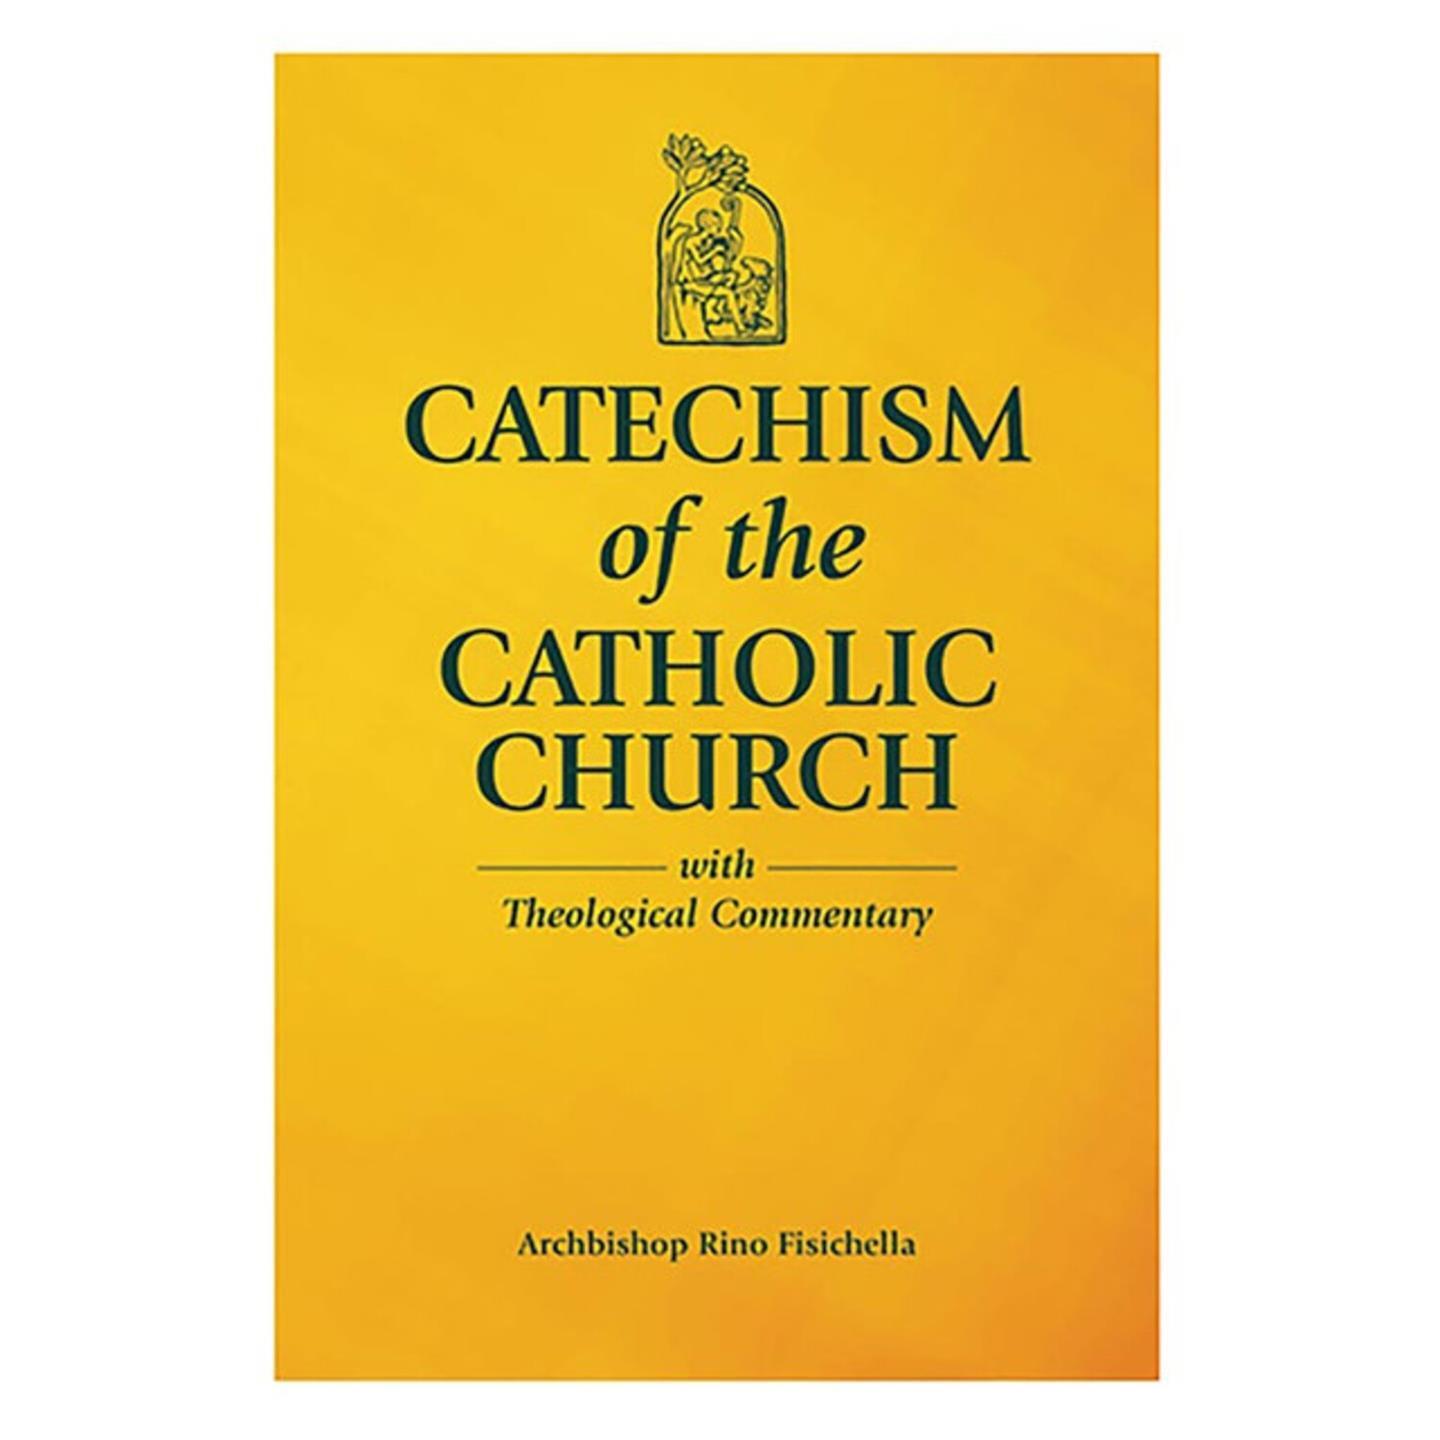 Catechism of The Catholic Church with Theological Commentary Size:6 x 9